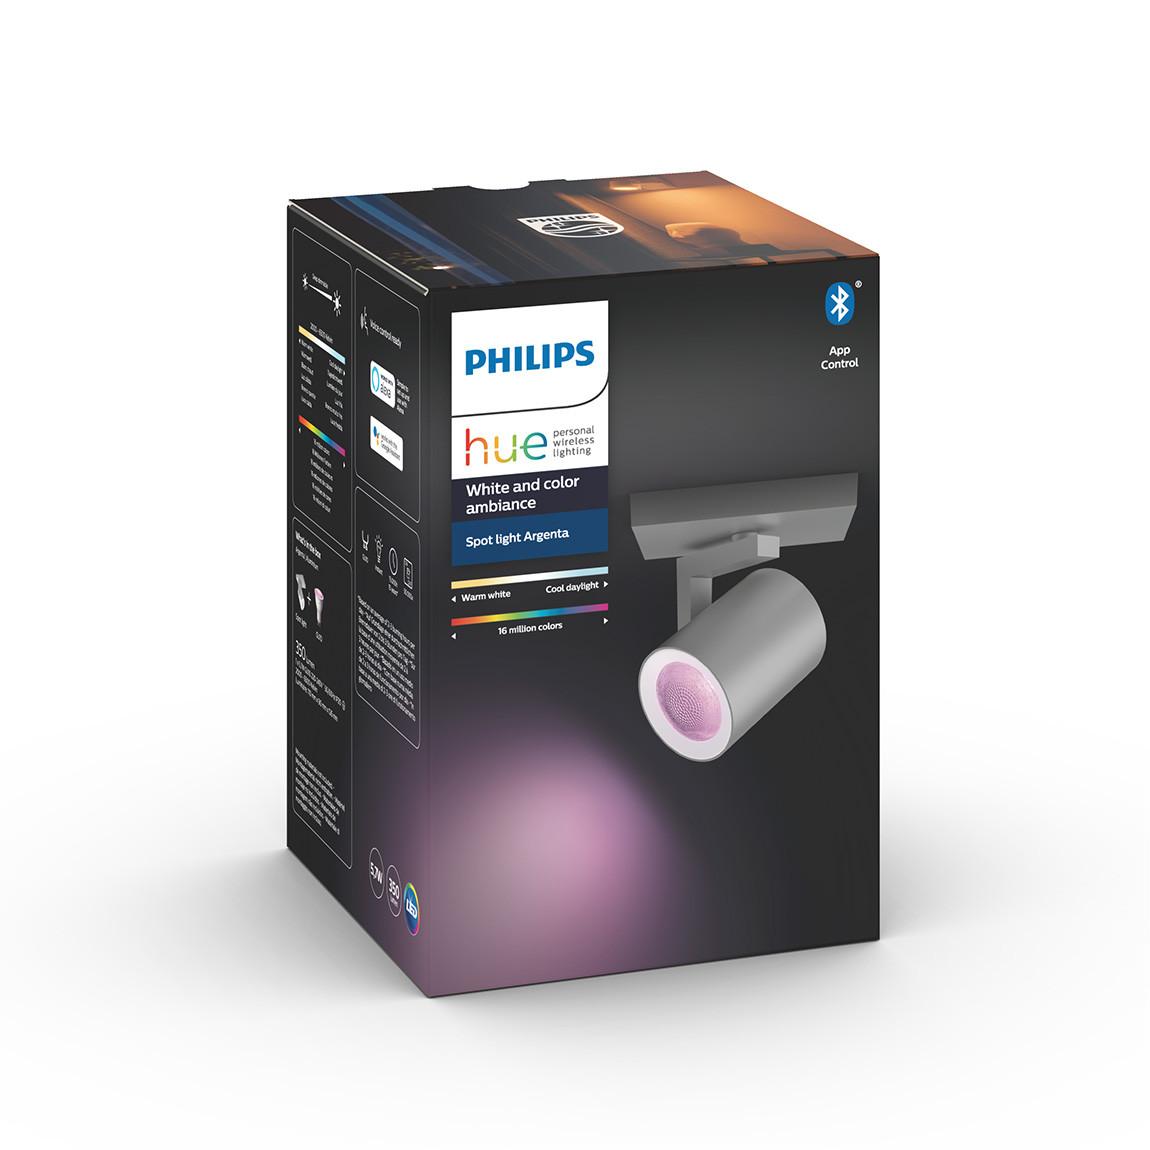 Philips Hue White and Color Ambiance Argenta Bluetooth Spot-Lampe - Grau  Verpackung